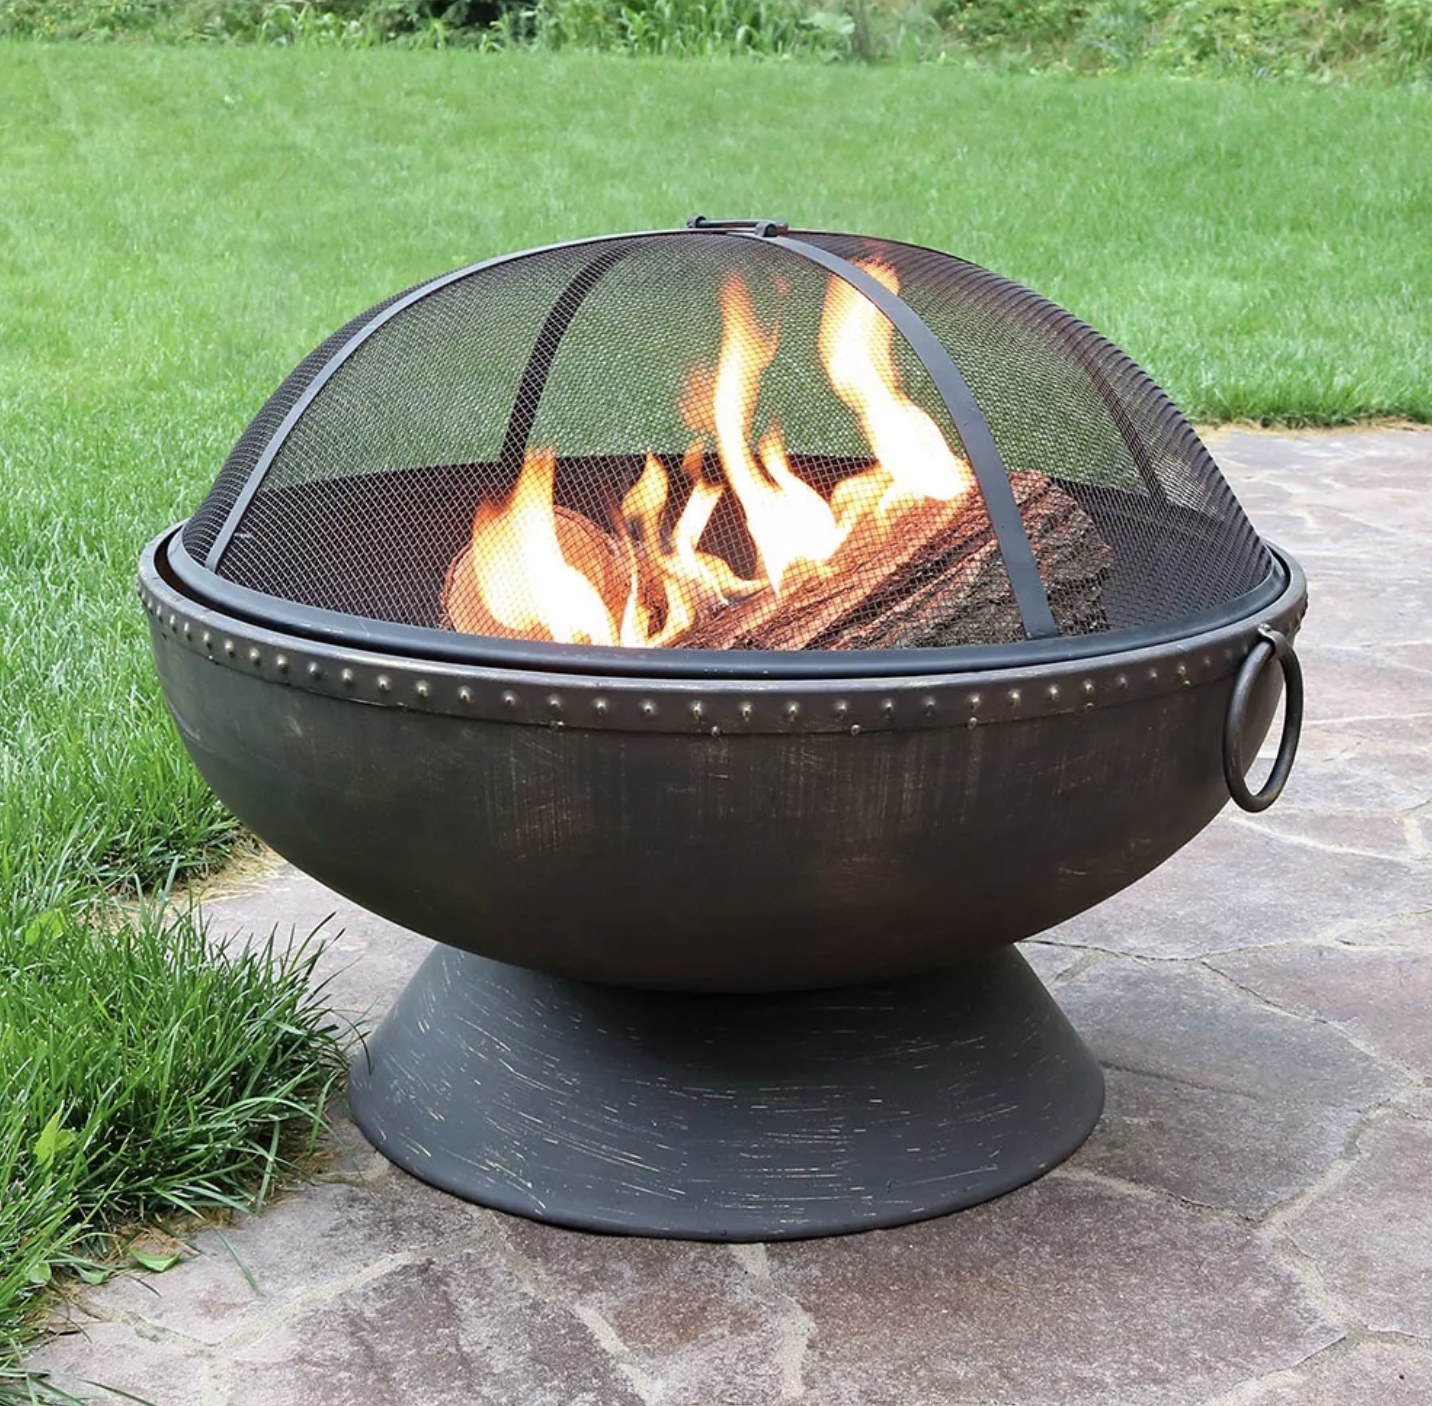 A fire pit bowl with a brushed steel pedestal base with a brass-tack edge, rings, and a domed screen covering a fire